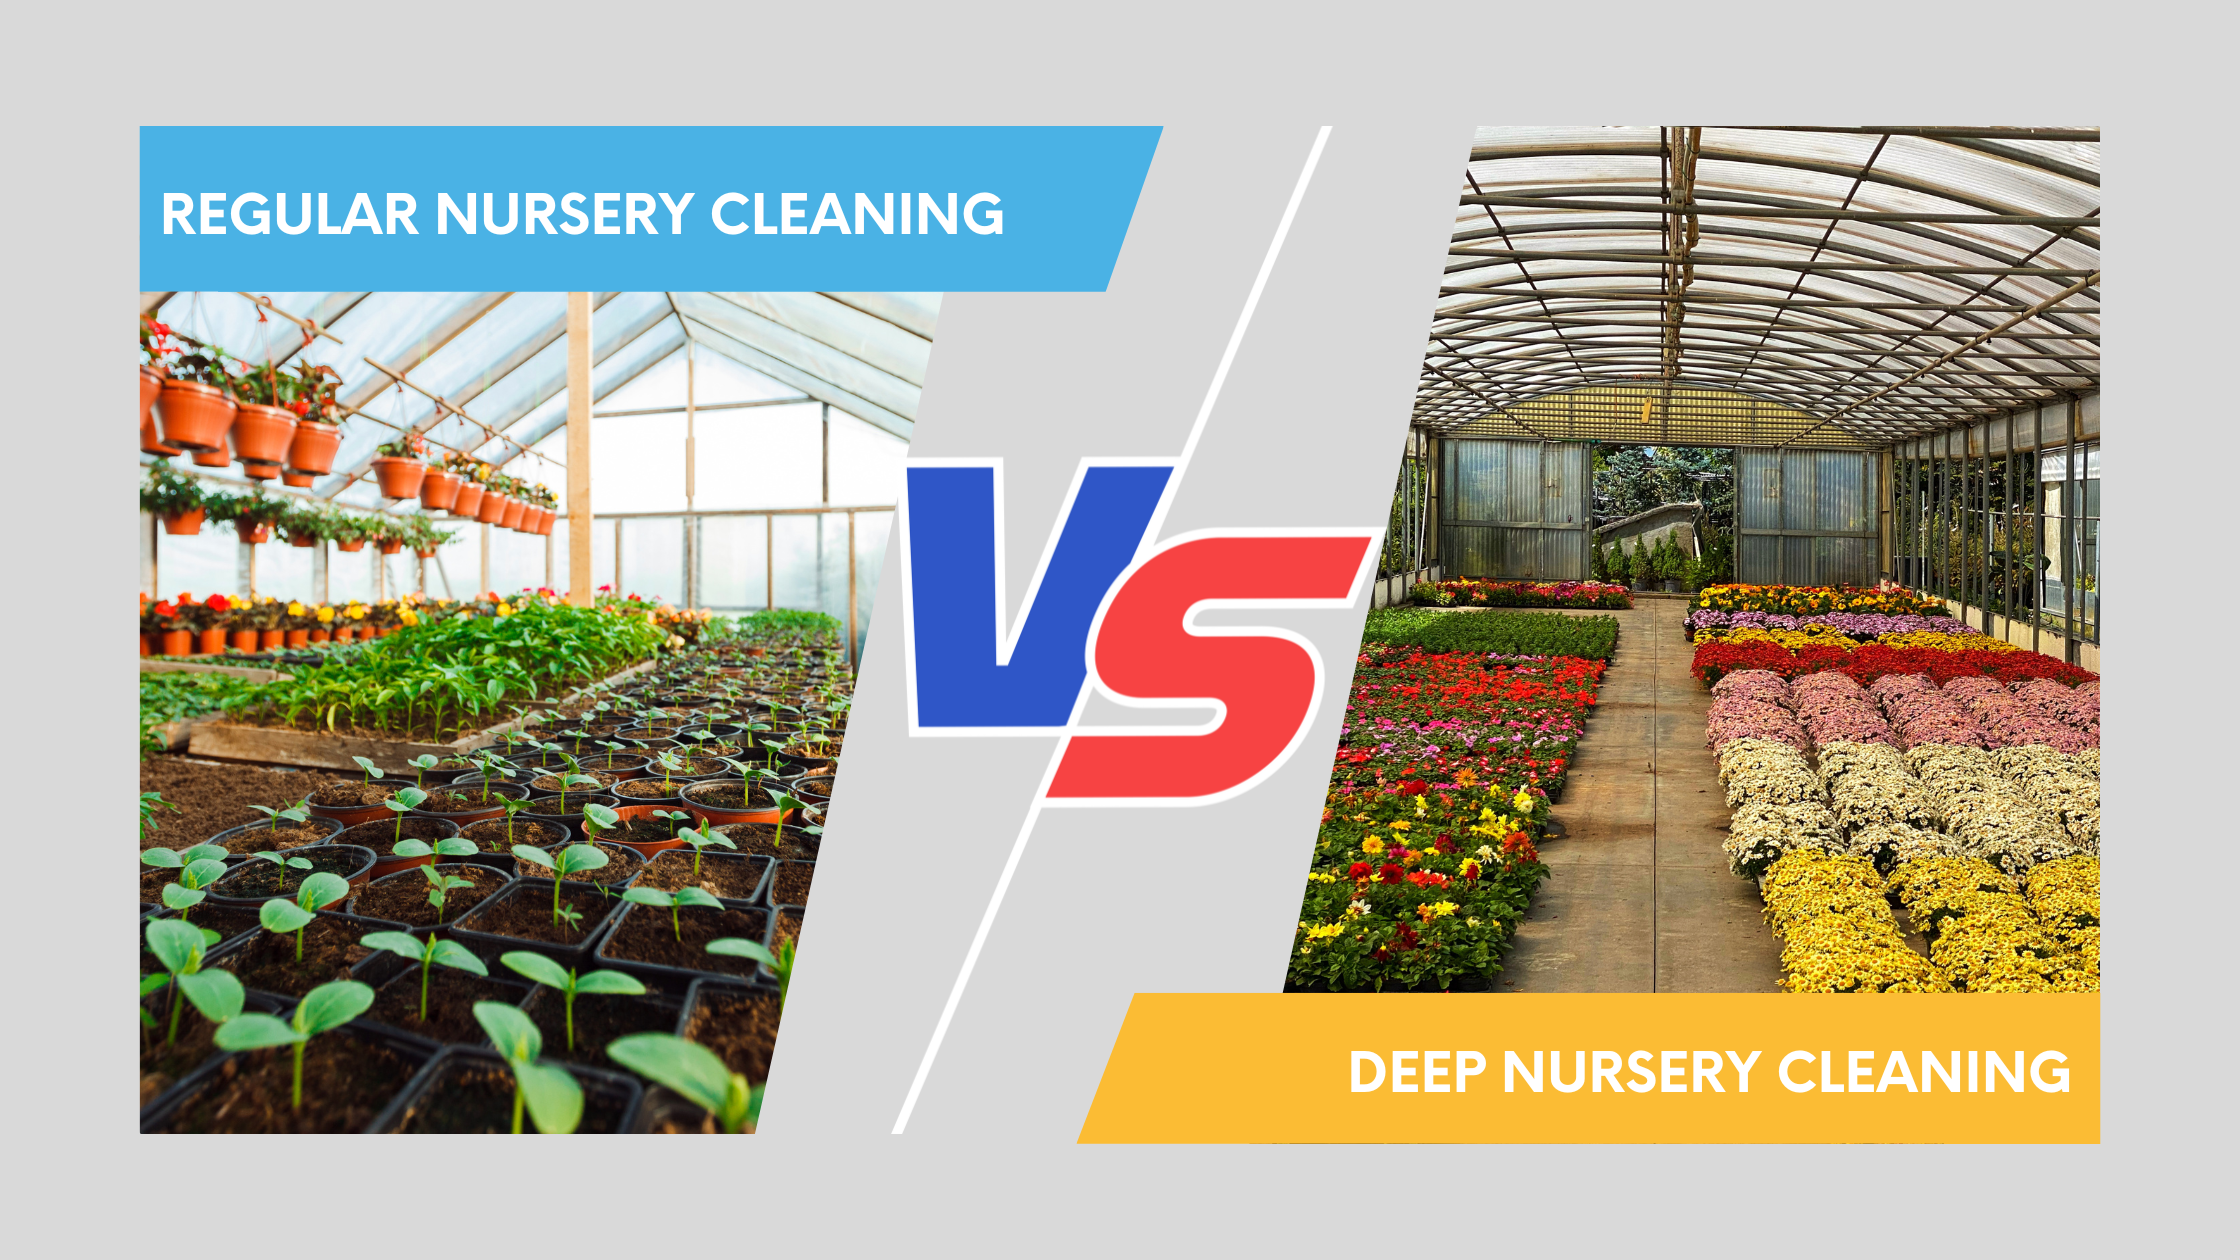 Regular cleaning vs deep cleaning of the nursery